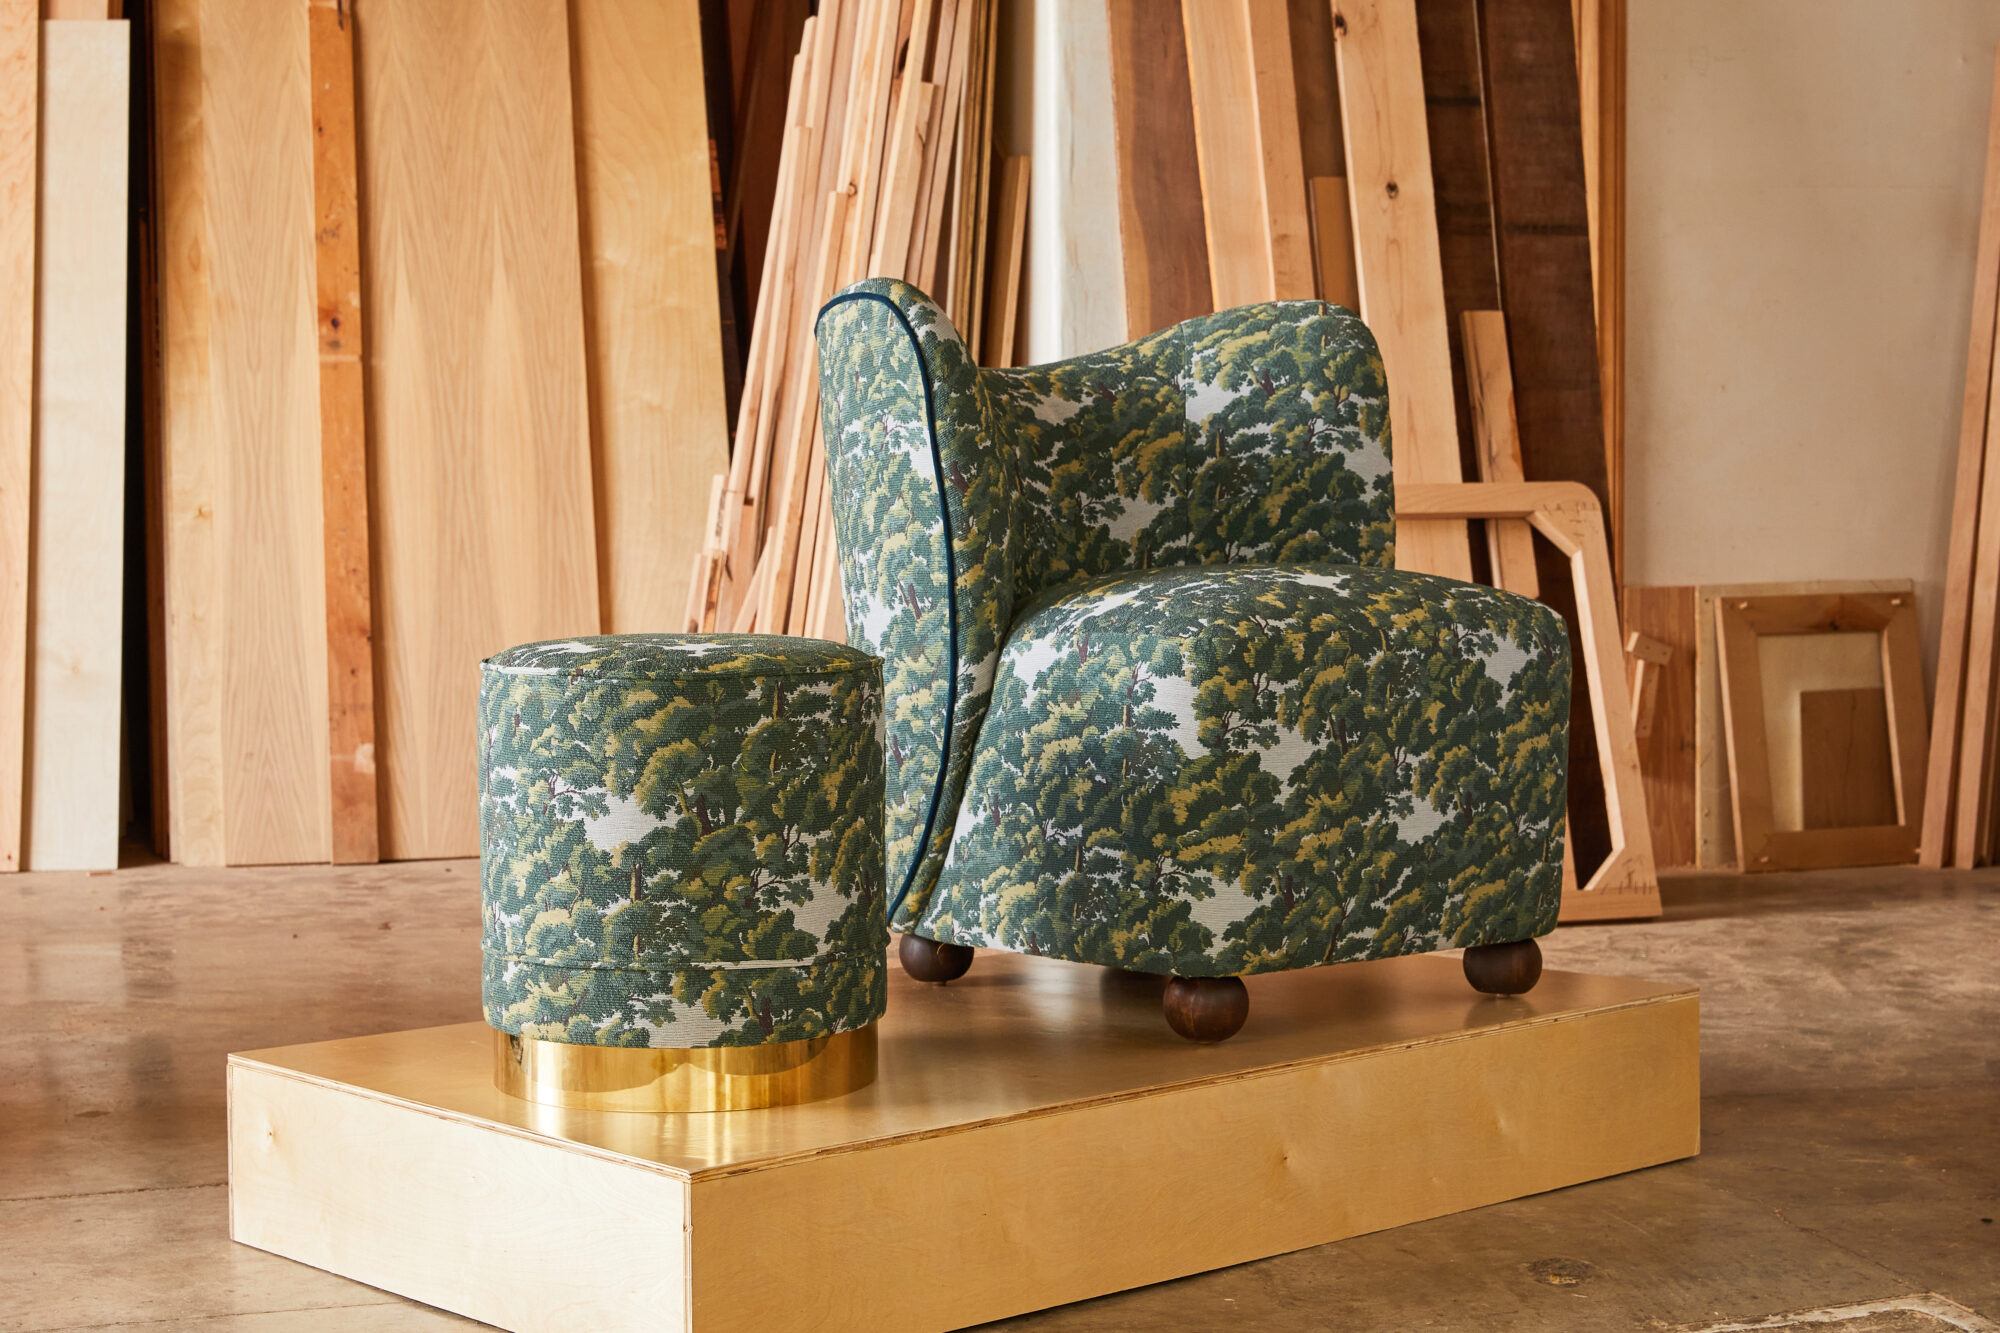 Chair and stool with oak tree-patterned upholstery upon a platform, featured at High Point Market